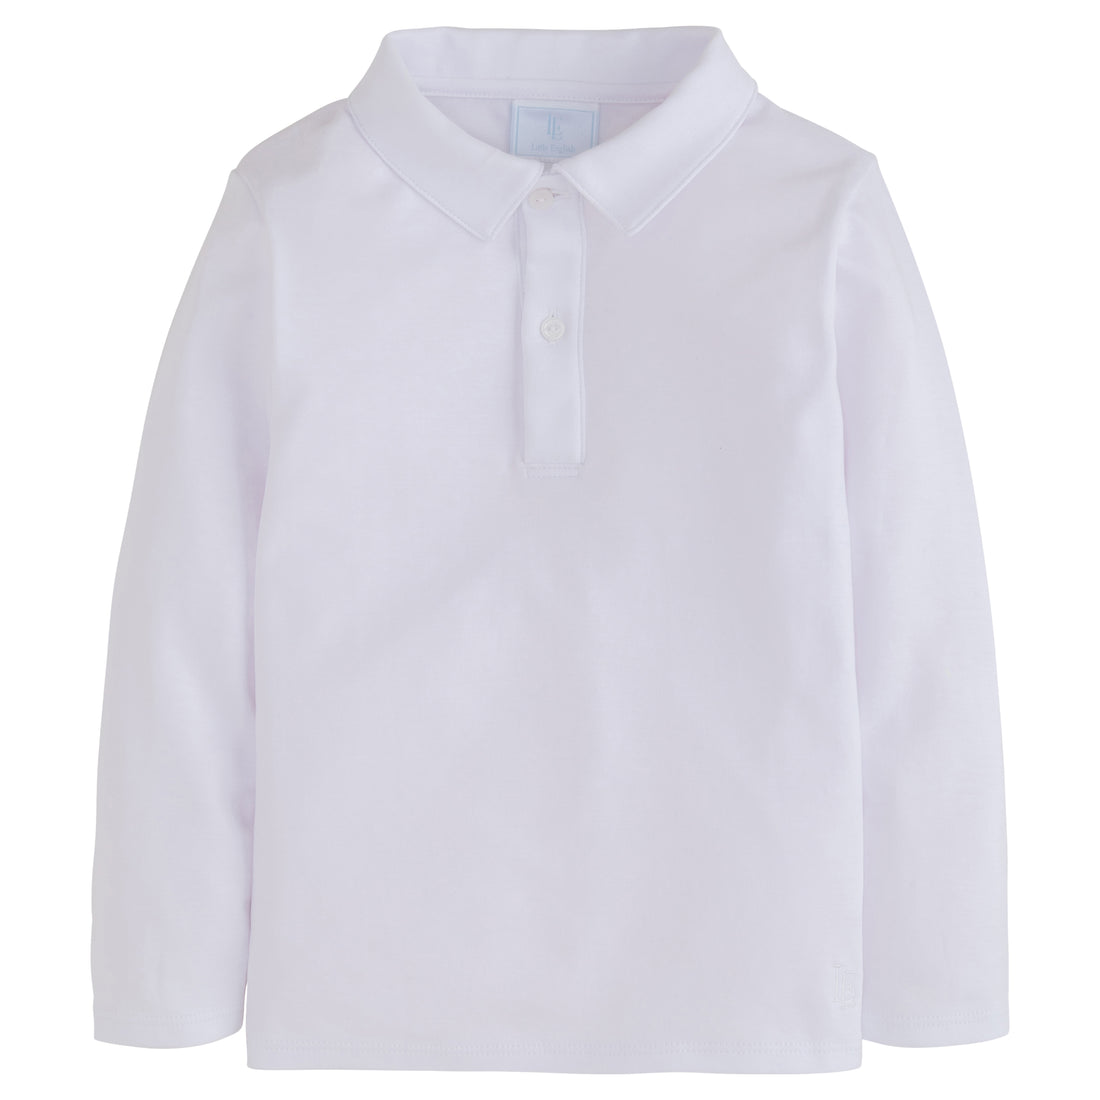 little english classic childrens clothing company boys solid white polo